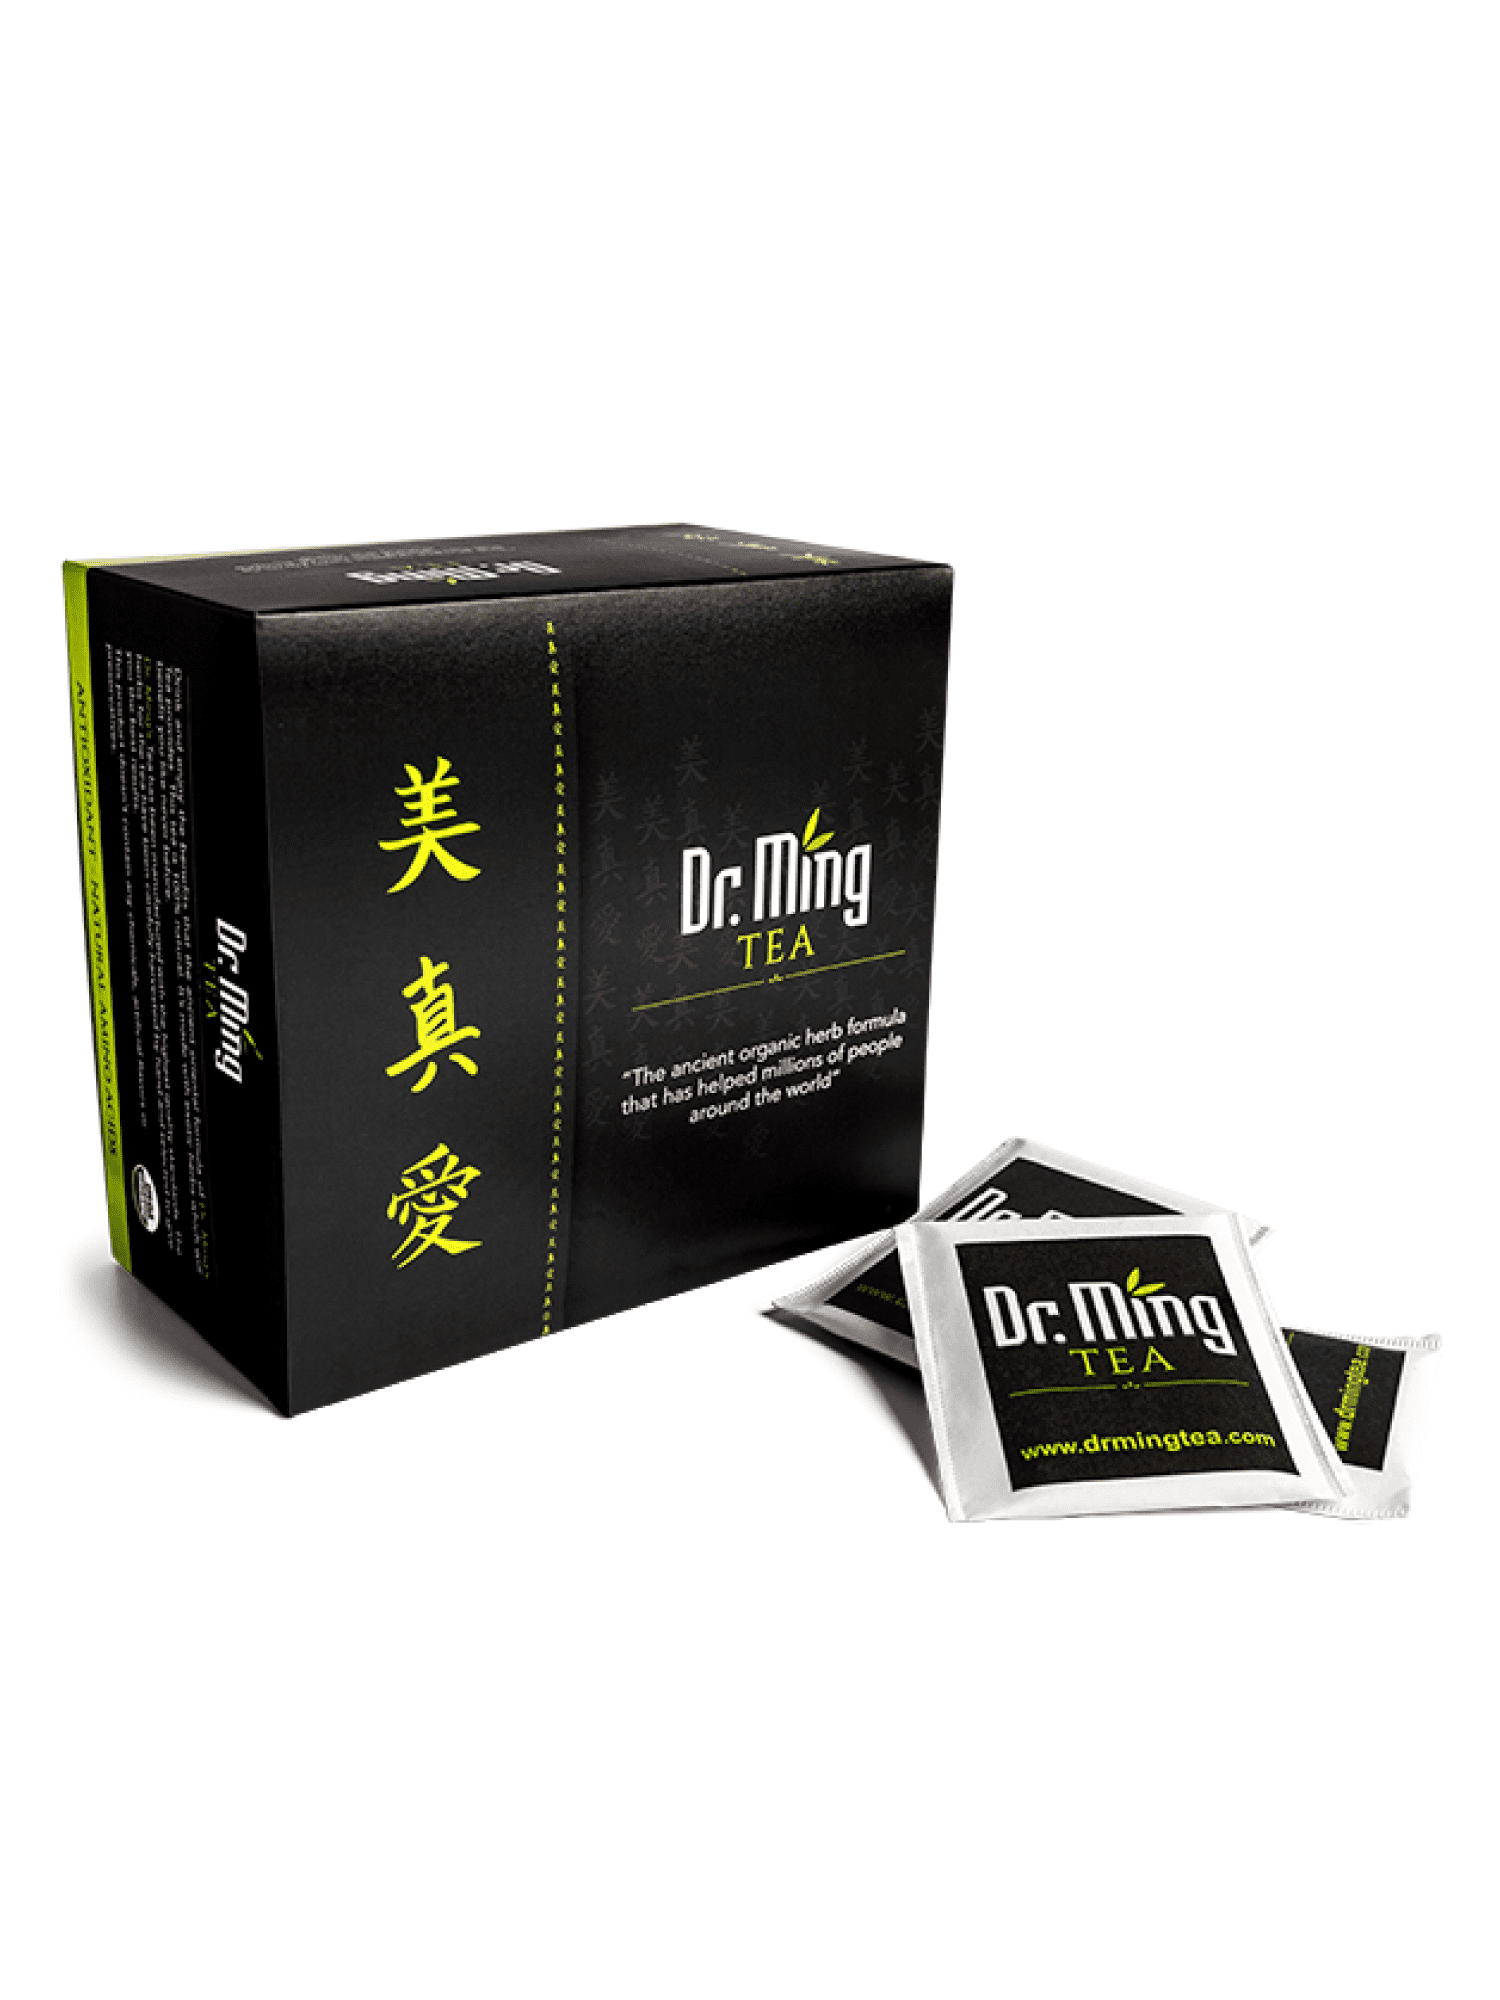 Dr. Ming Slimming Green Tea for Weight Loss (60 Bags)